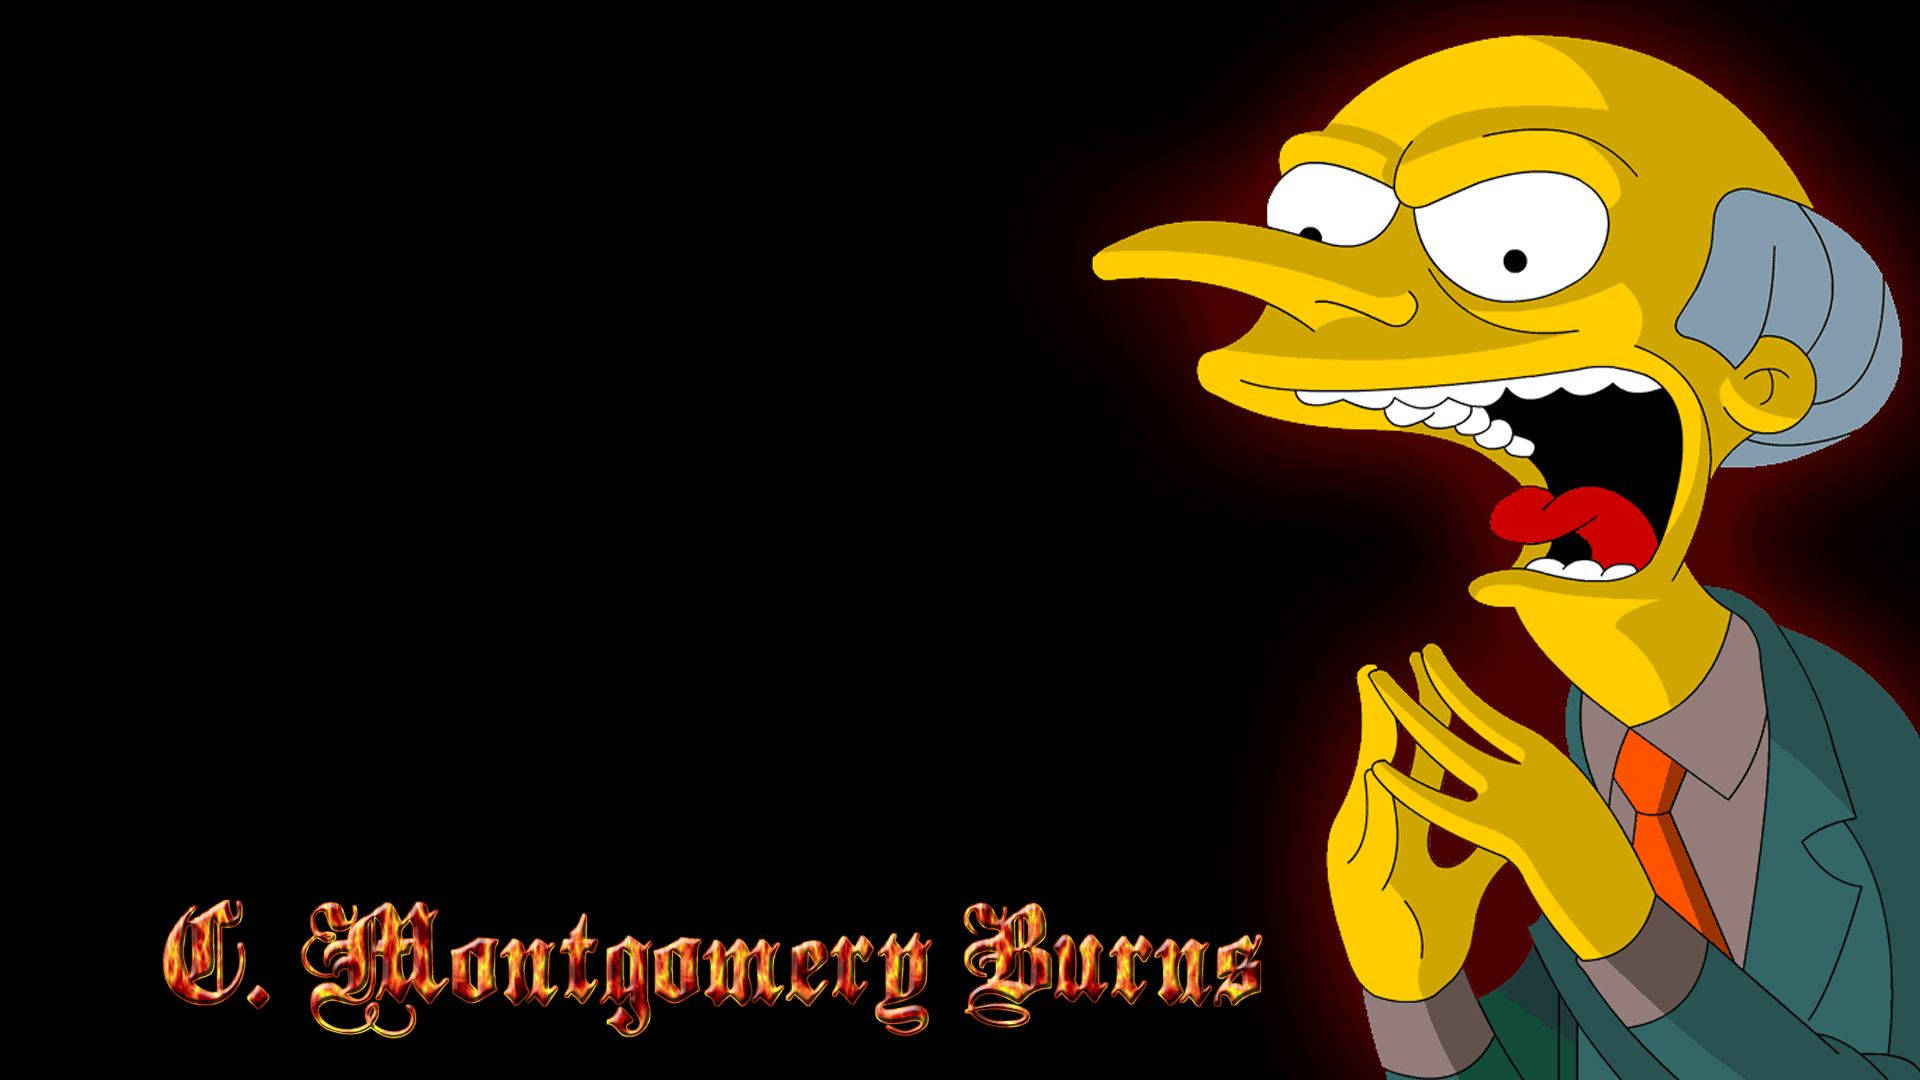 Mr. Burns From The Simpsons Background